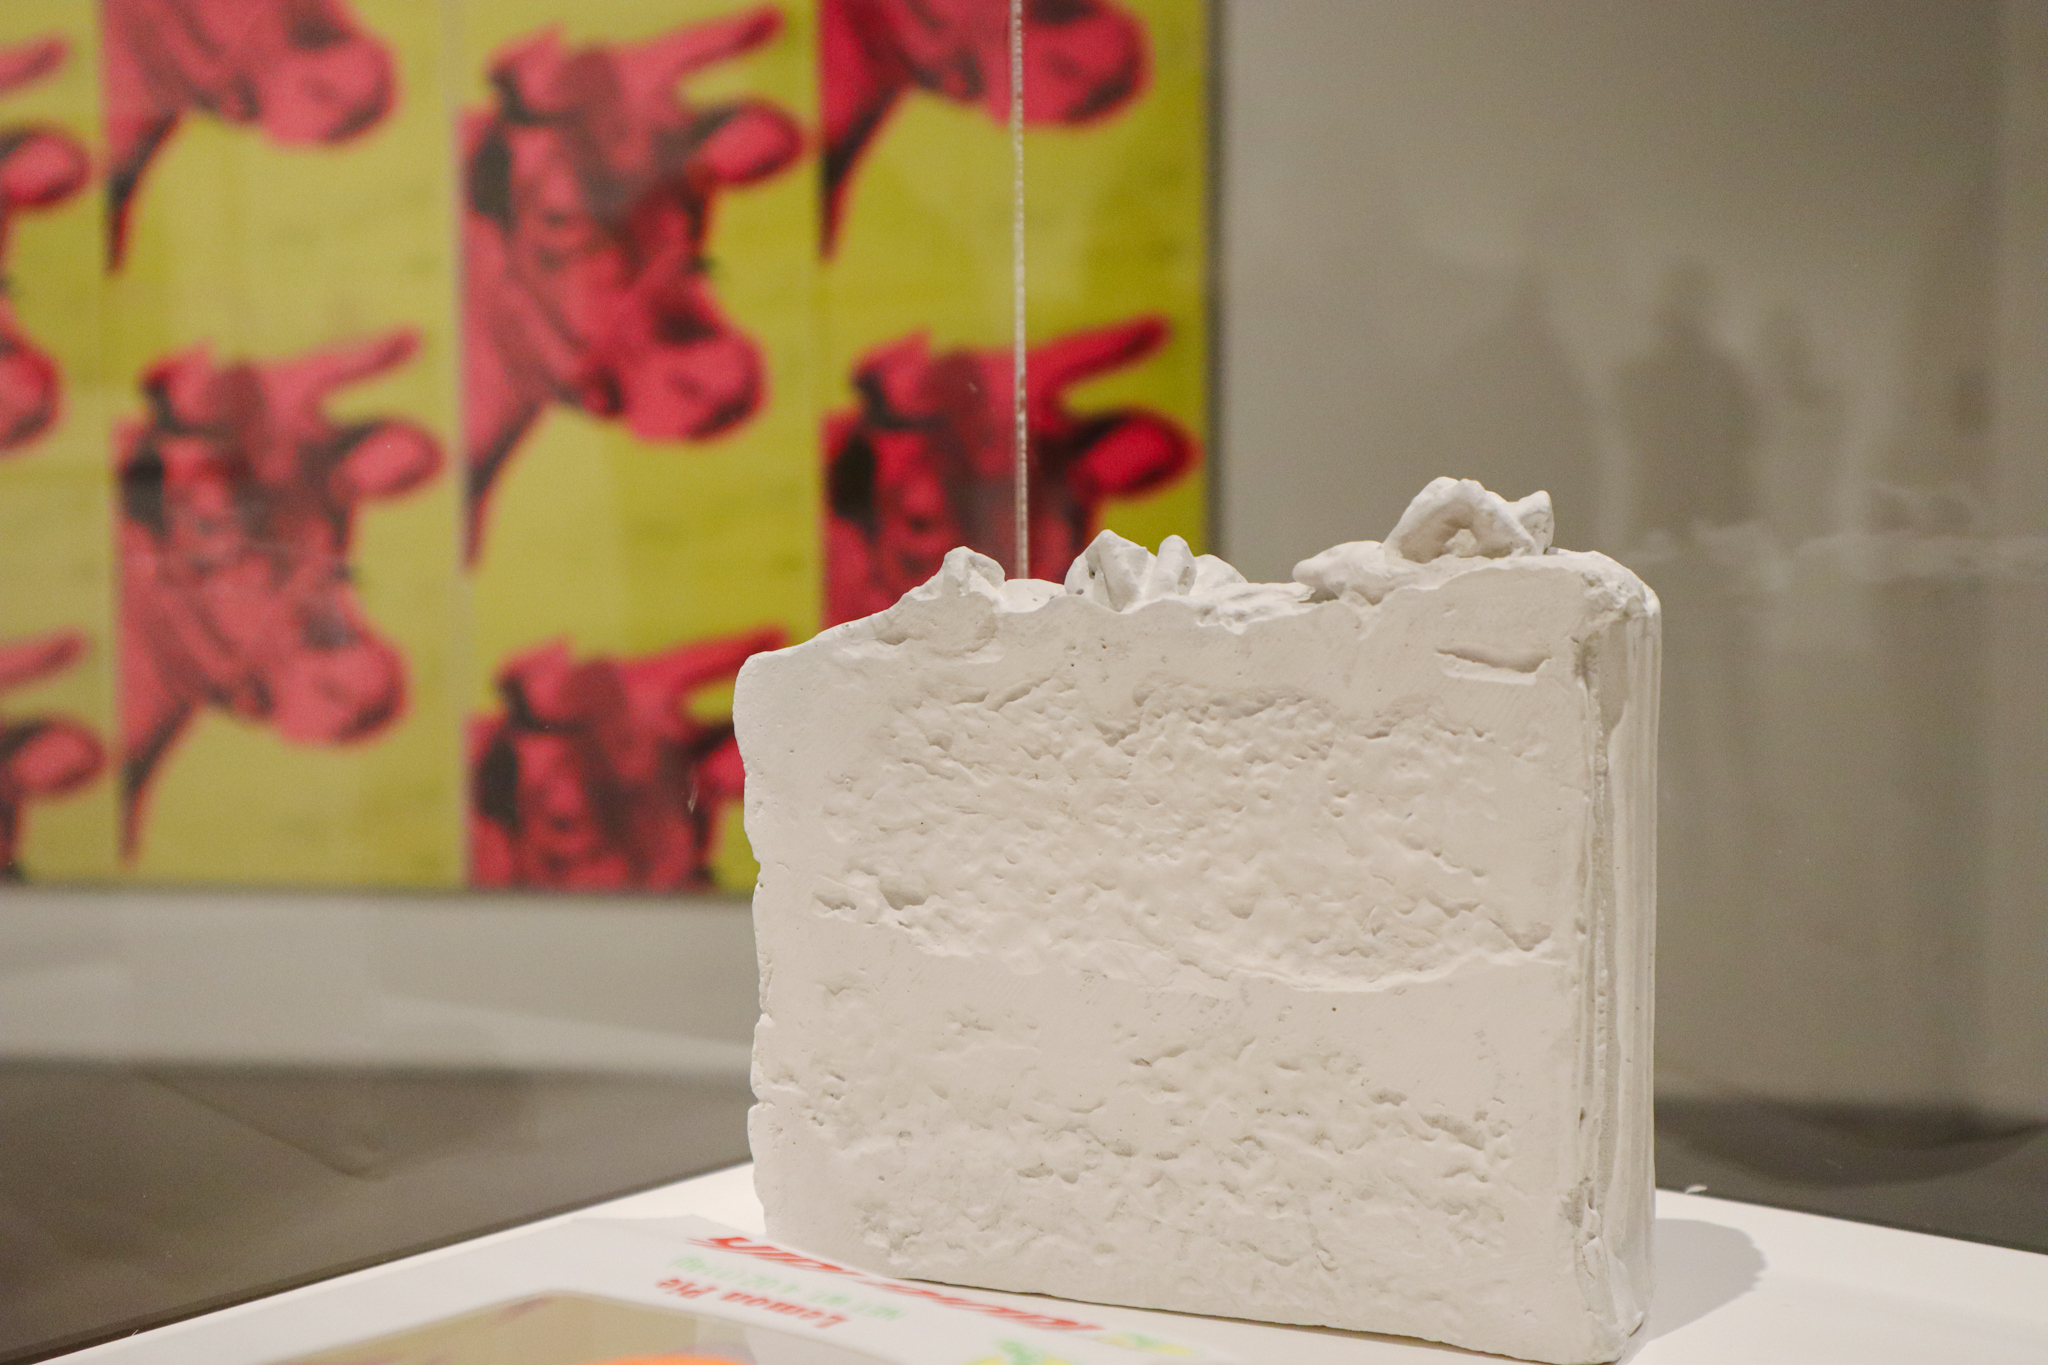 A ceramic slice of white cake sits on a white plinth with a glass case around it. We can see a large piece behind the cake with pink cow heads printed over and over on a yellow background.